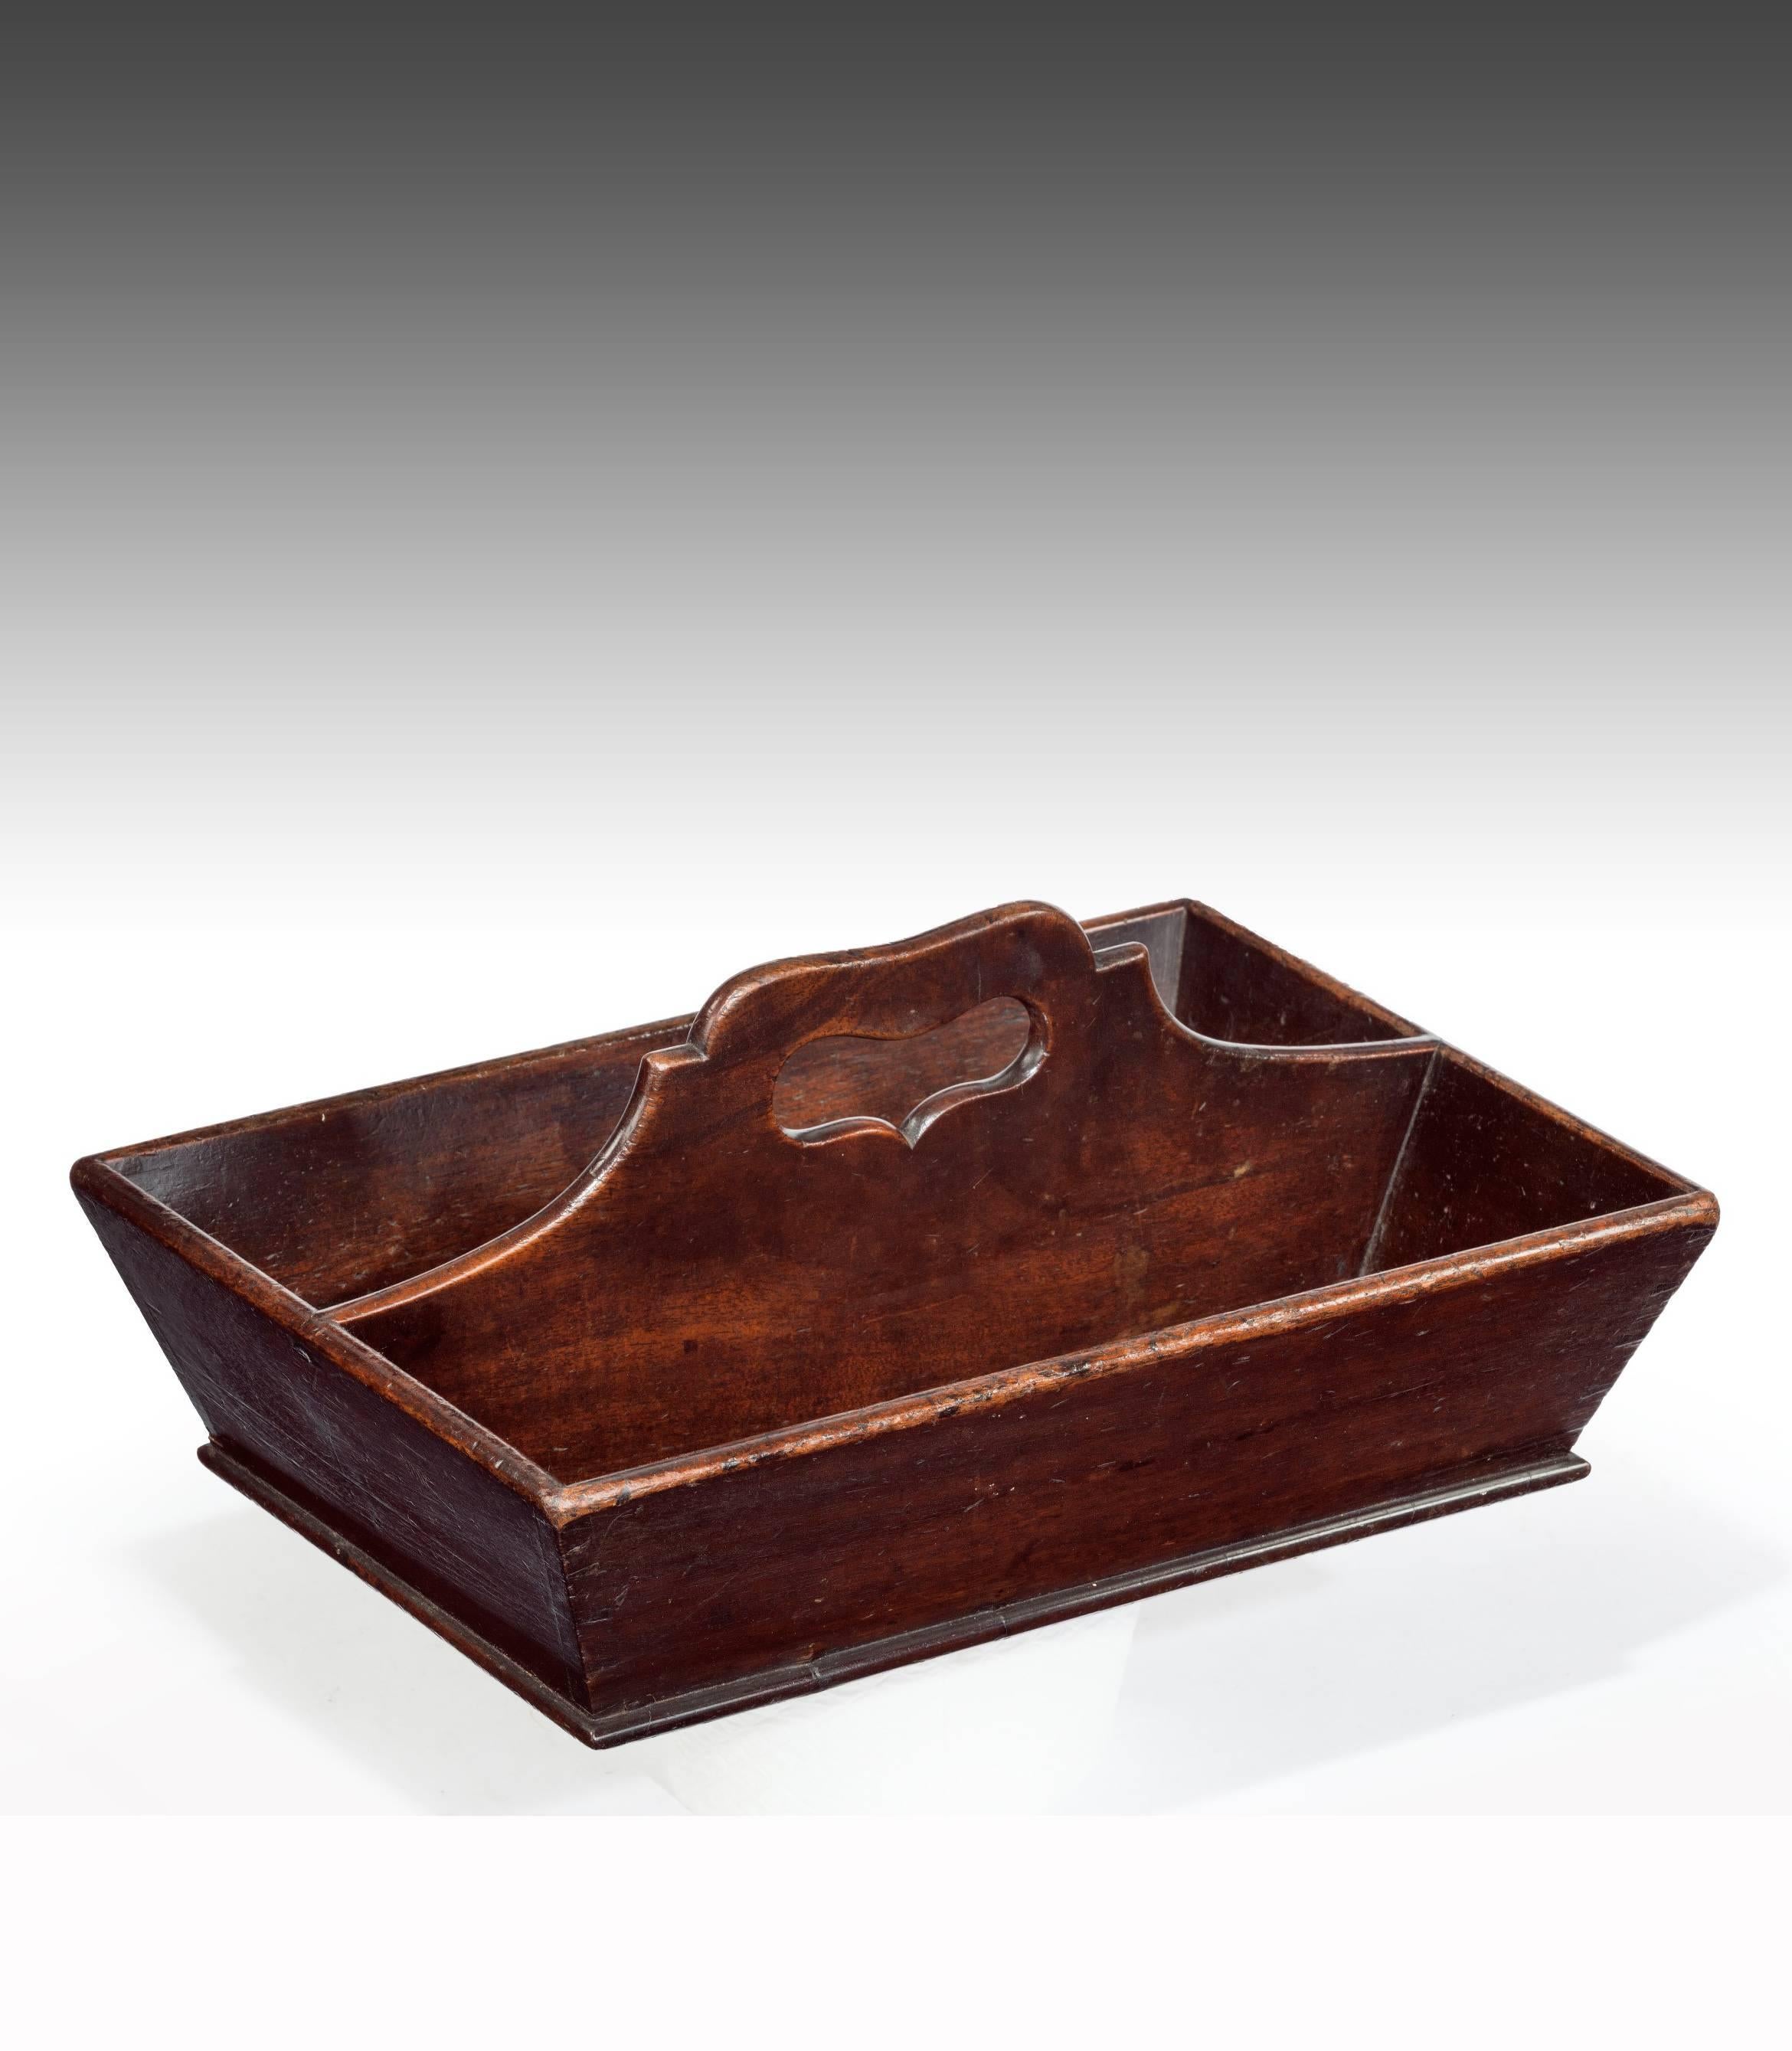 A Fine antique Georgian mahogany cutlery tray or knife box. 
Having two sections with raised and heart shaped pierced central carrying handle constructed of a Fine cut of mahogany. 
This Georgian tray retains its original patina having been waxed